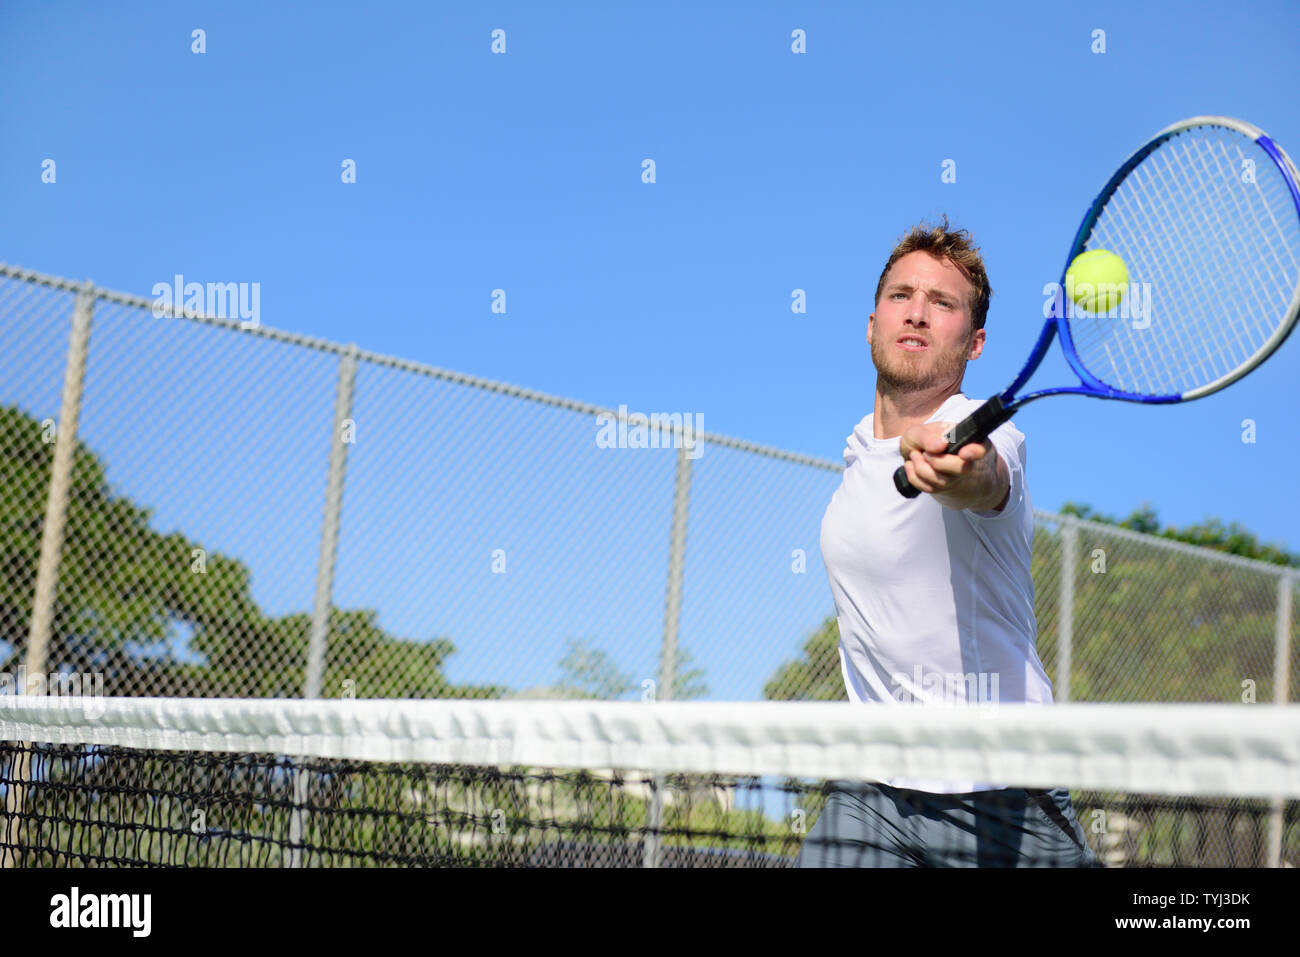 Tennis player man hitting ball in a volley. Male sport fitness athlete playing tennis on outdoors hard court in summer. Healthy active lifestyle concept. Stock Photo